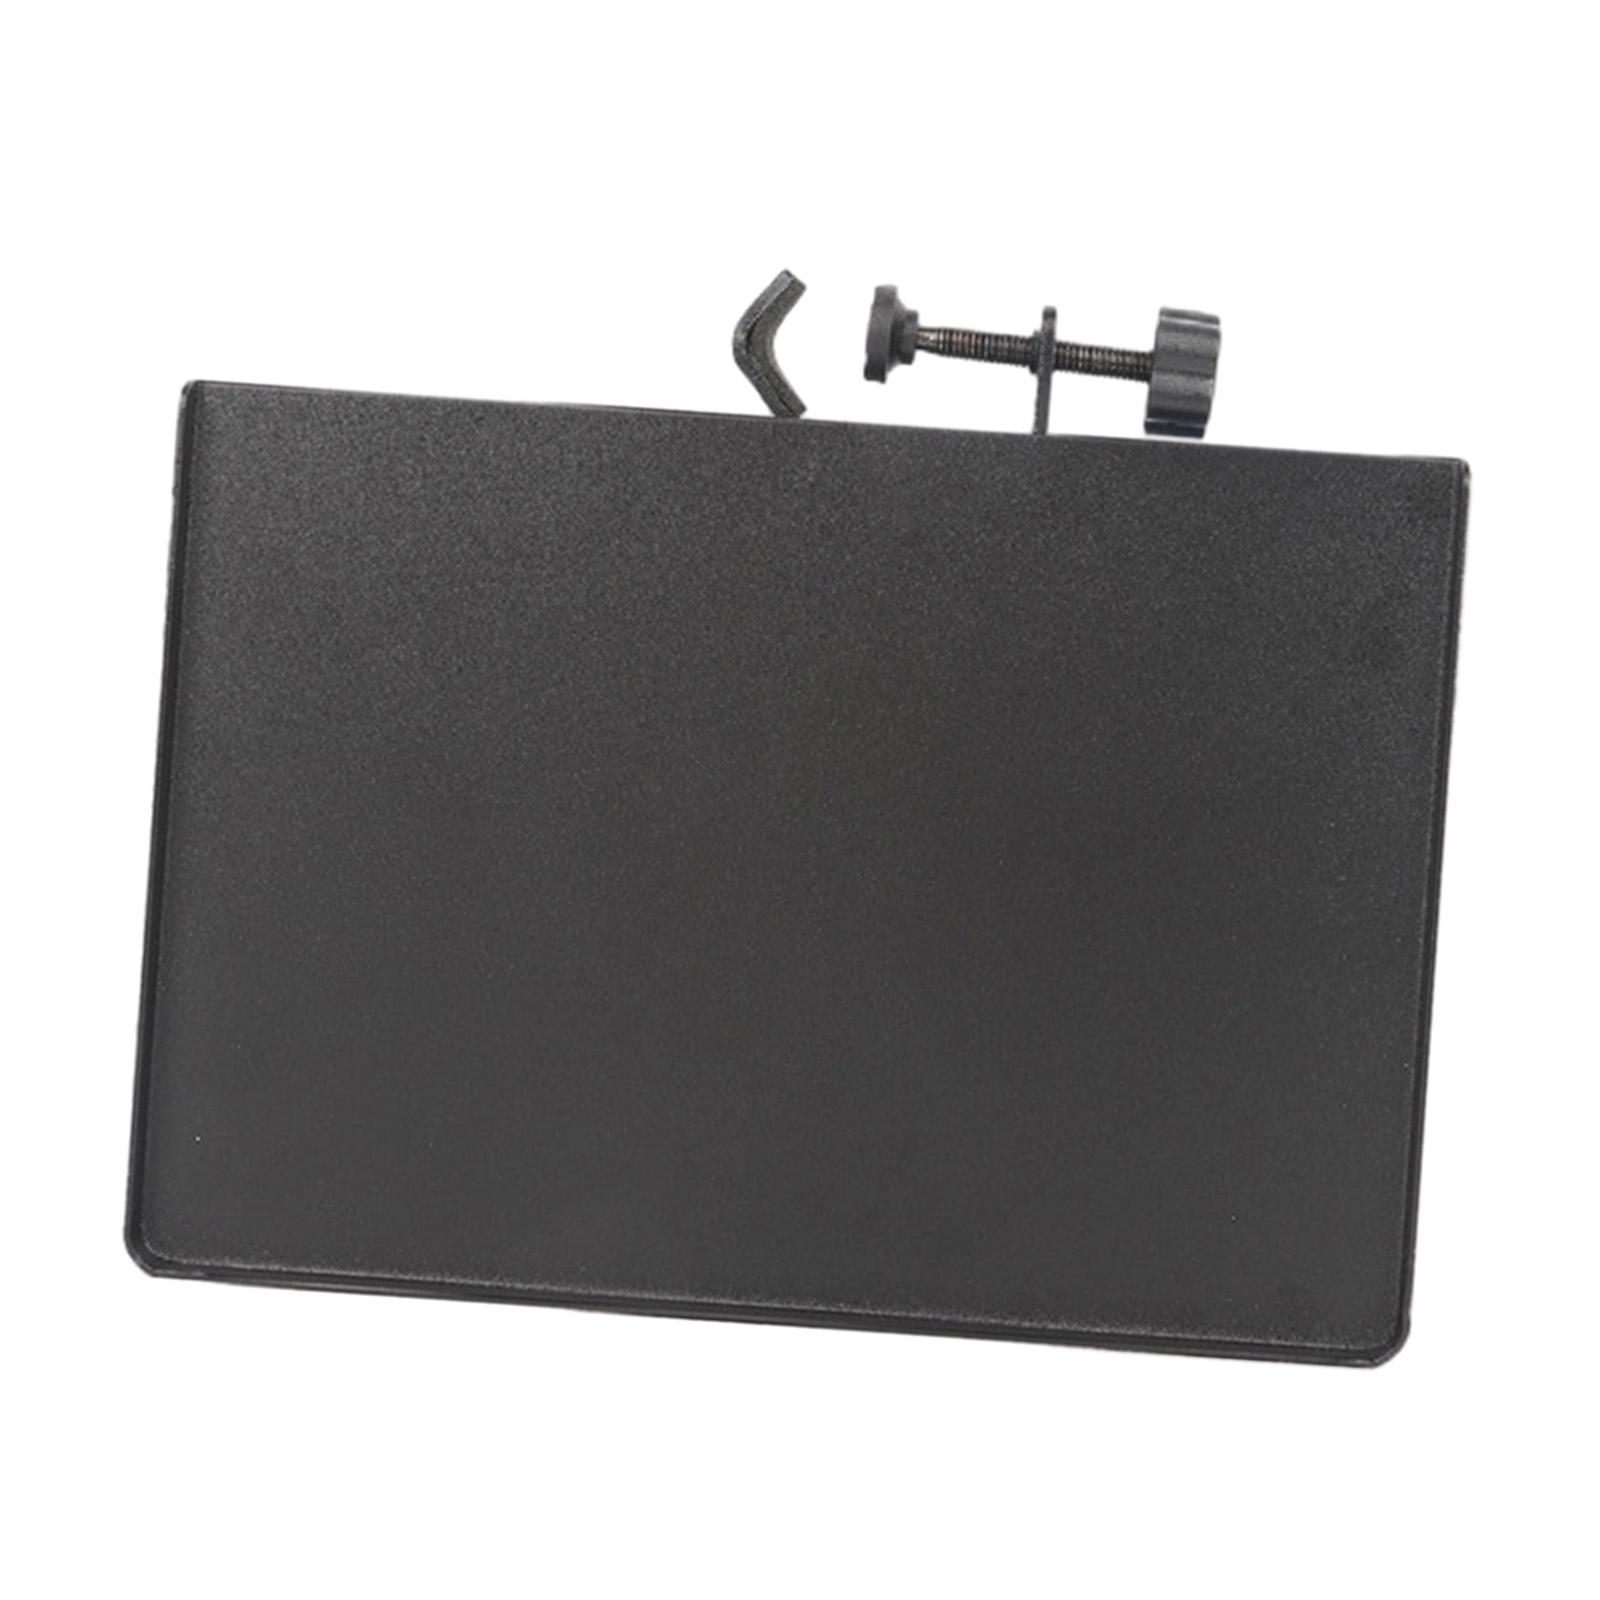 Soundcard Tray Adjustable Stable Office for Music Sheet Live Stage